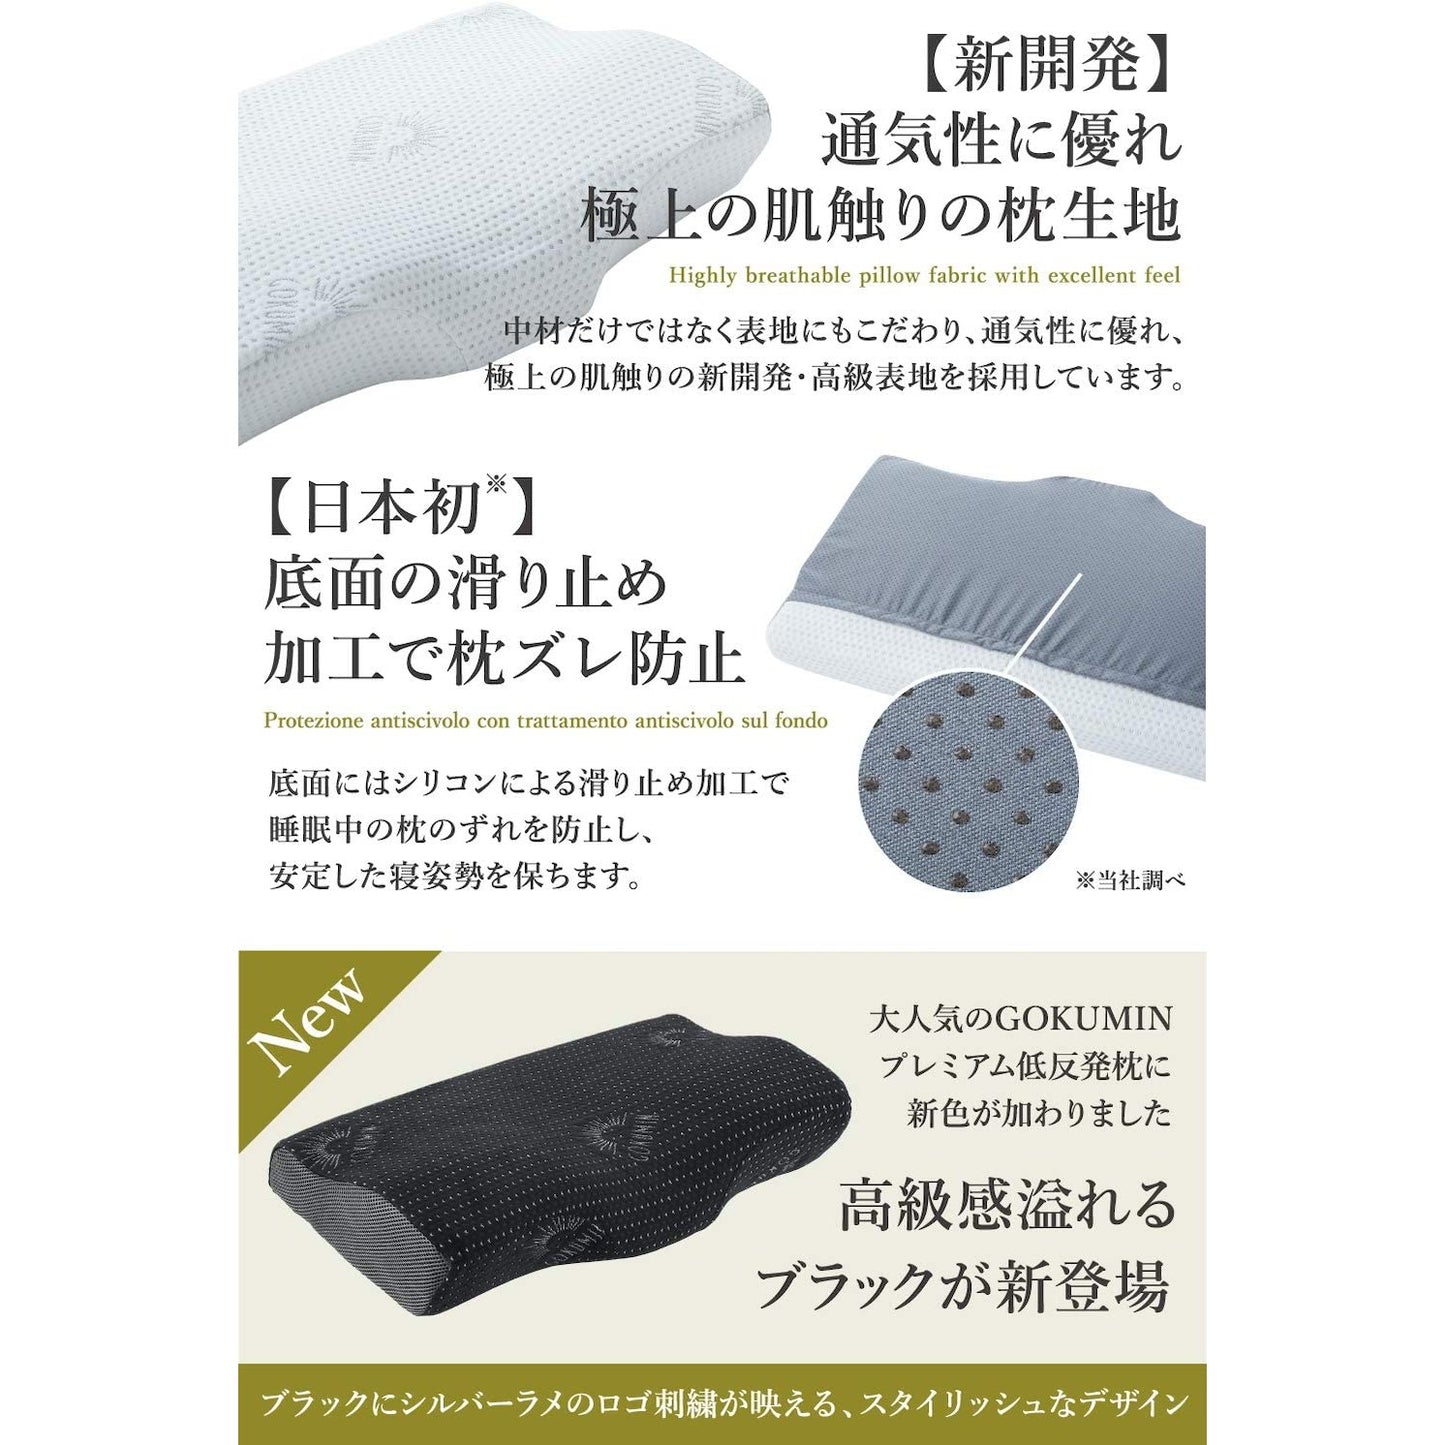 Memory Foam Pillow (Some materials made in Japan)